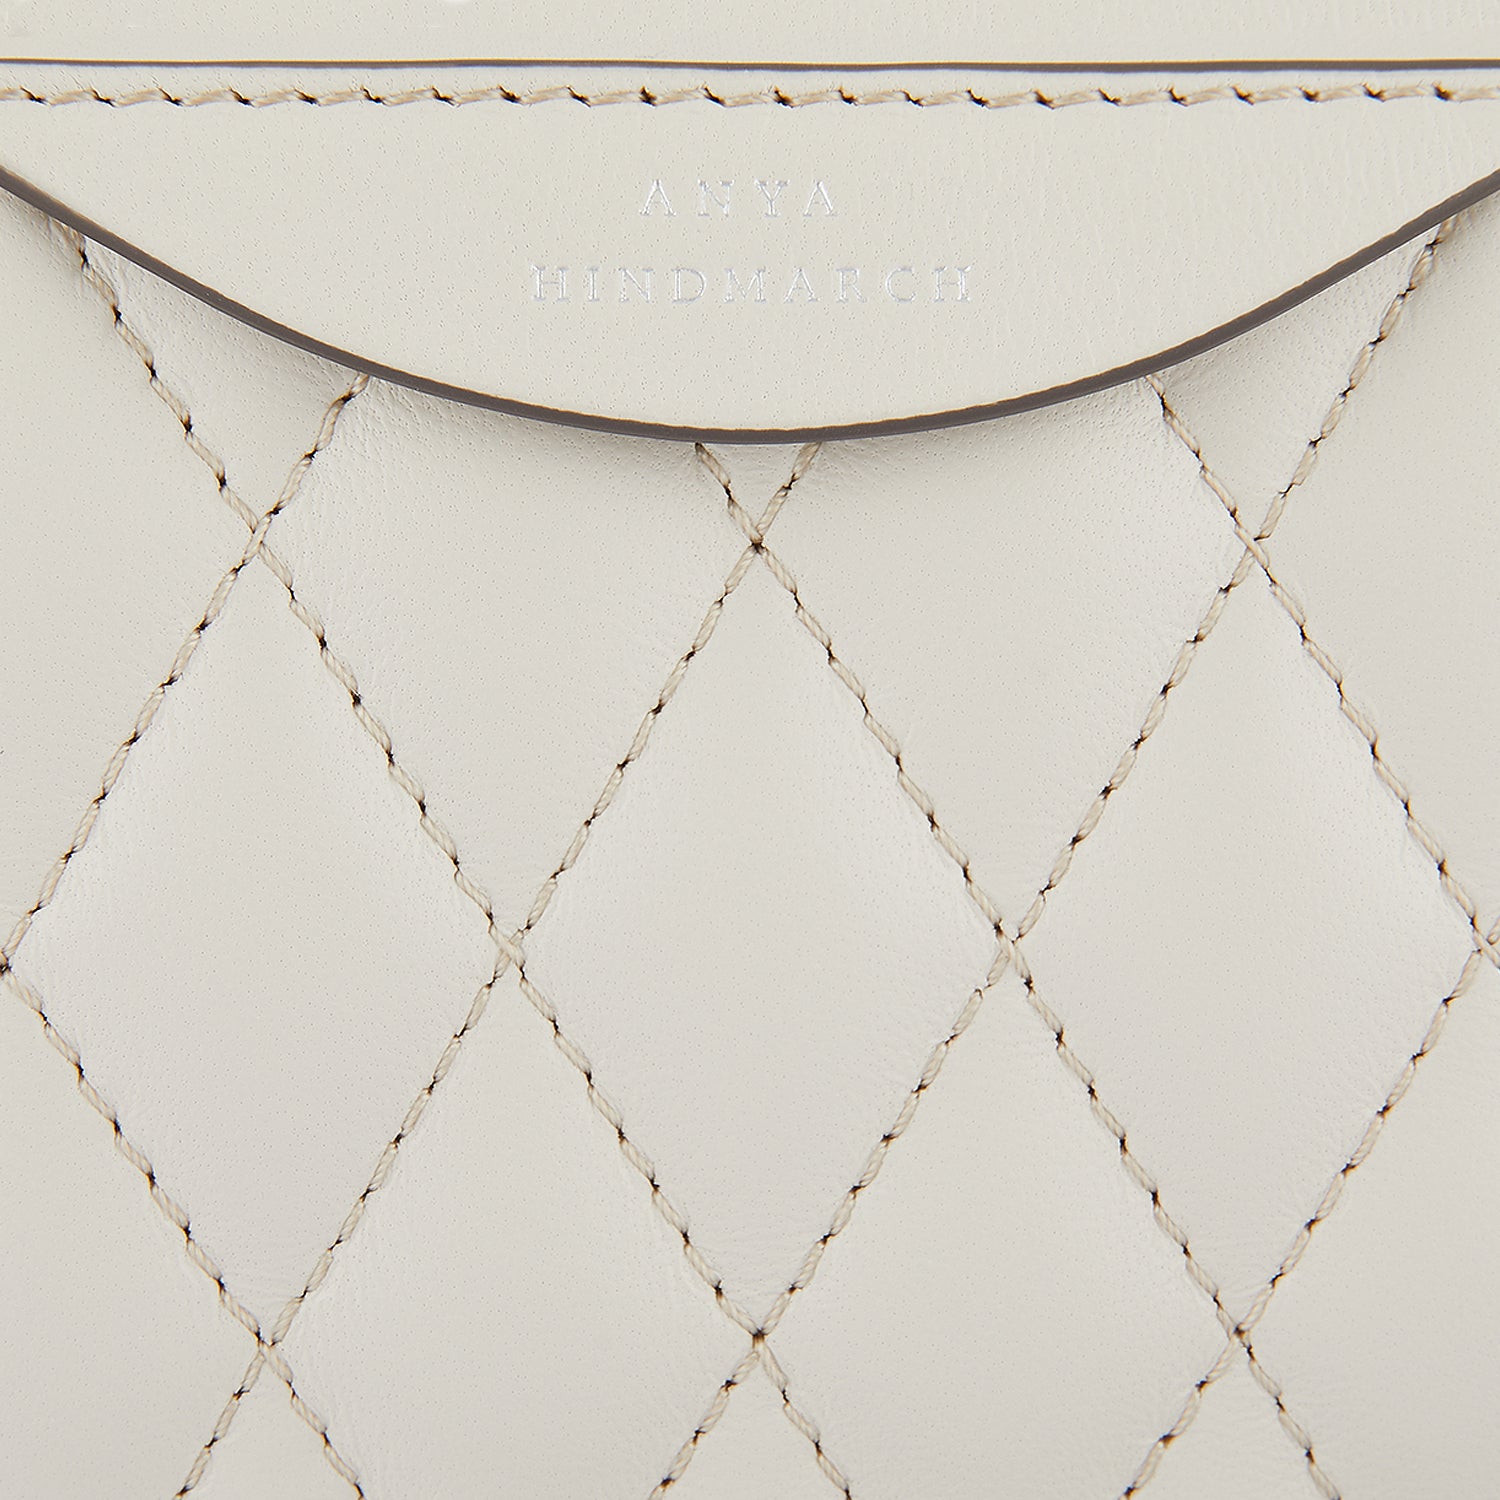 AH Quilted Double Zip Crossbody in Chalk, Sable